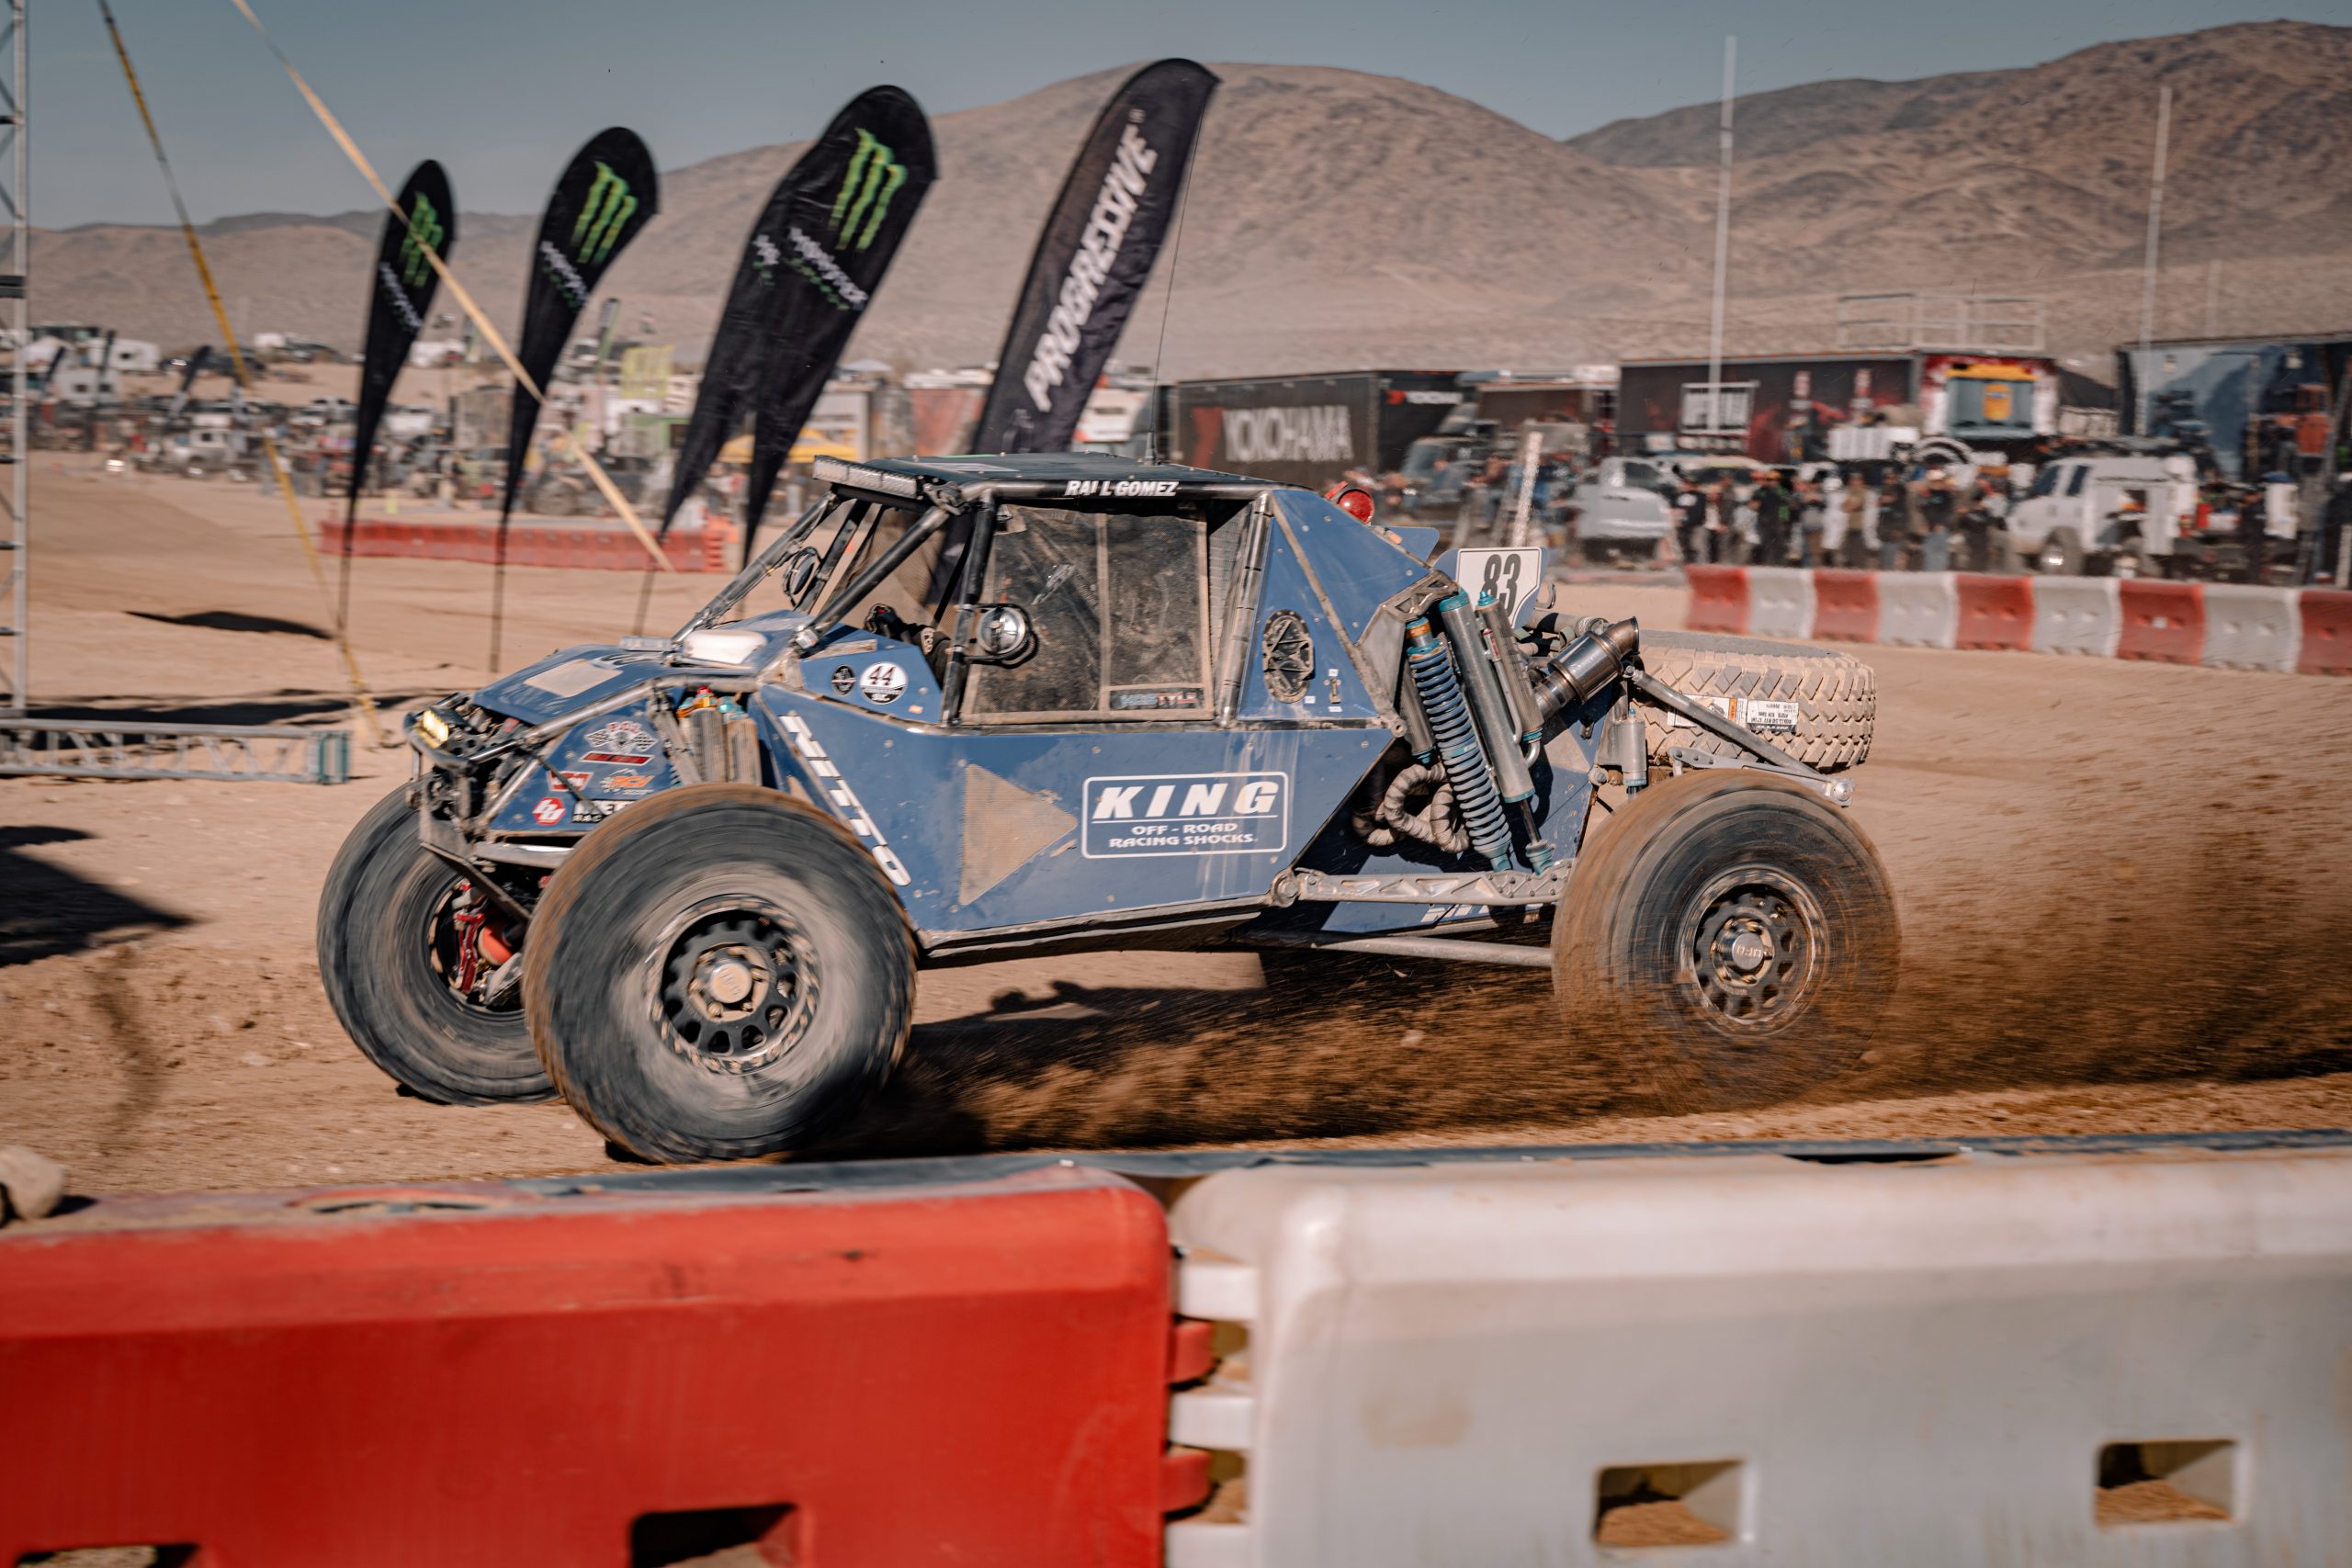 Raul Gomez Completes King Shocks’ Domination of 2022 King of the Hammers with Race of Kings Win